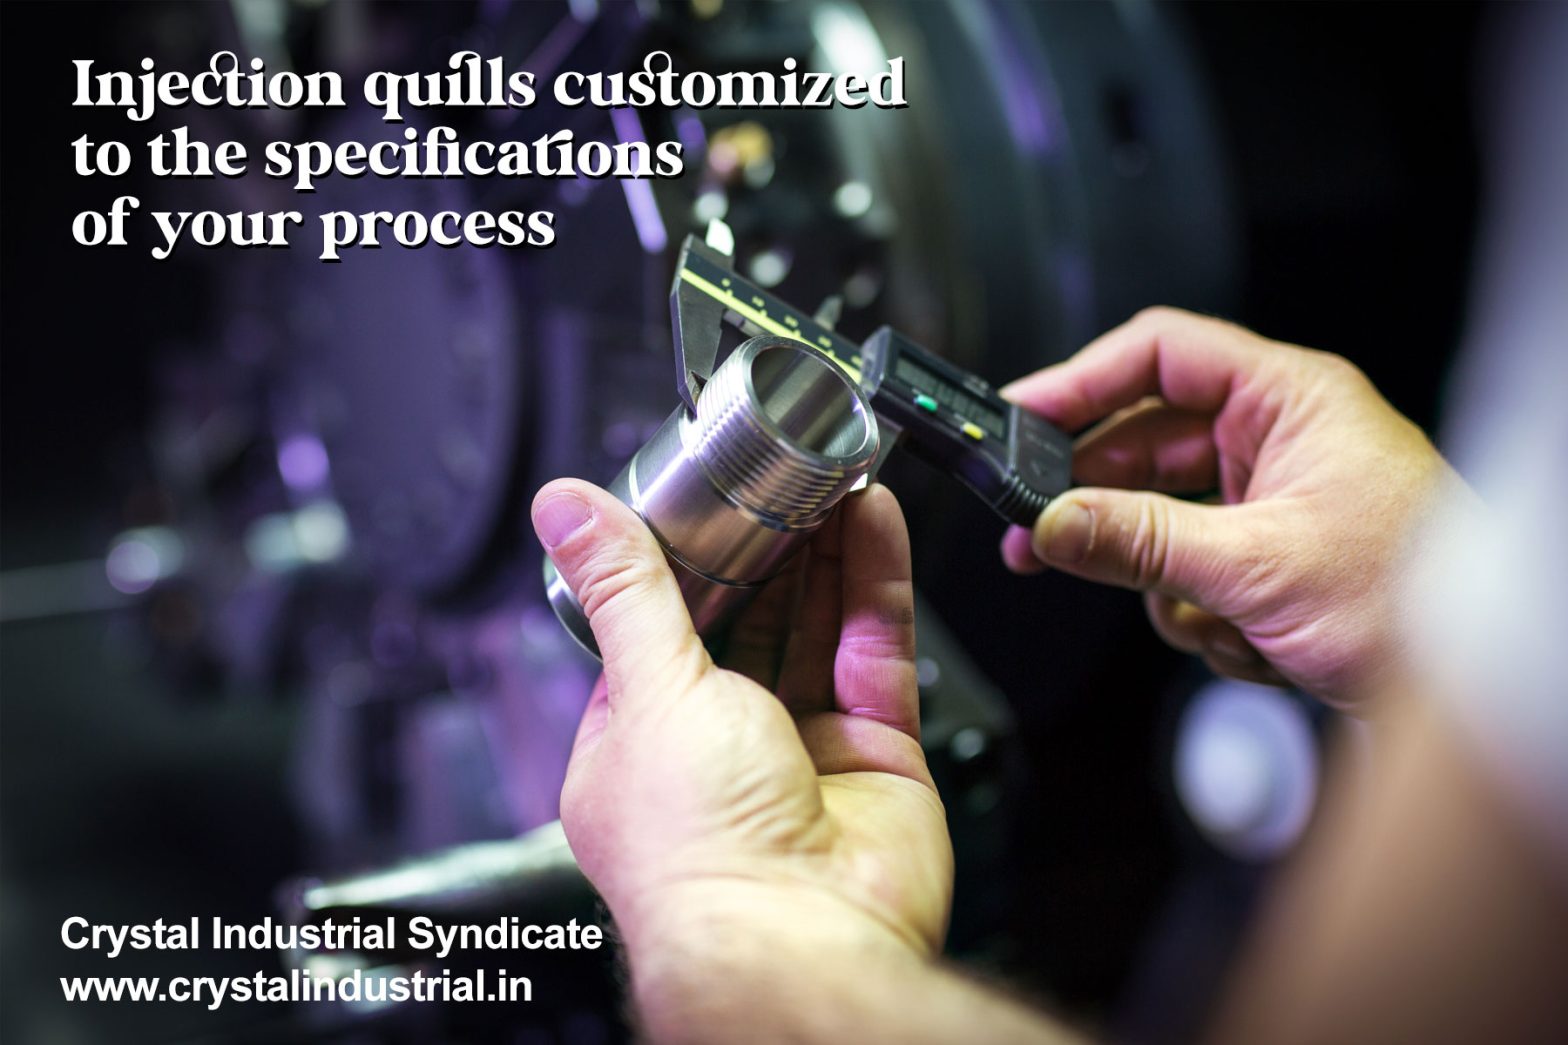 Custom injection quills from Crystal Industrial